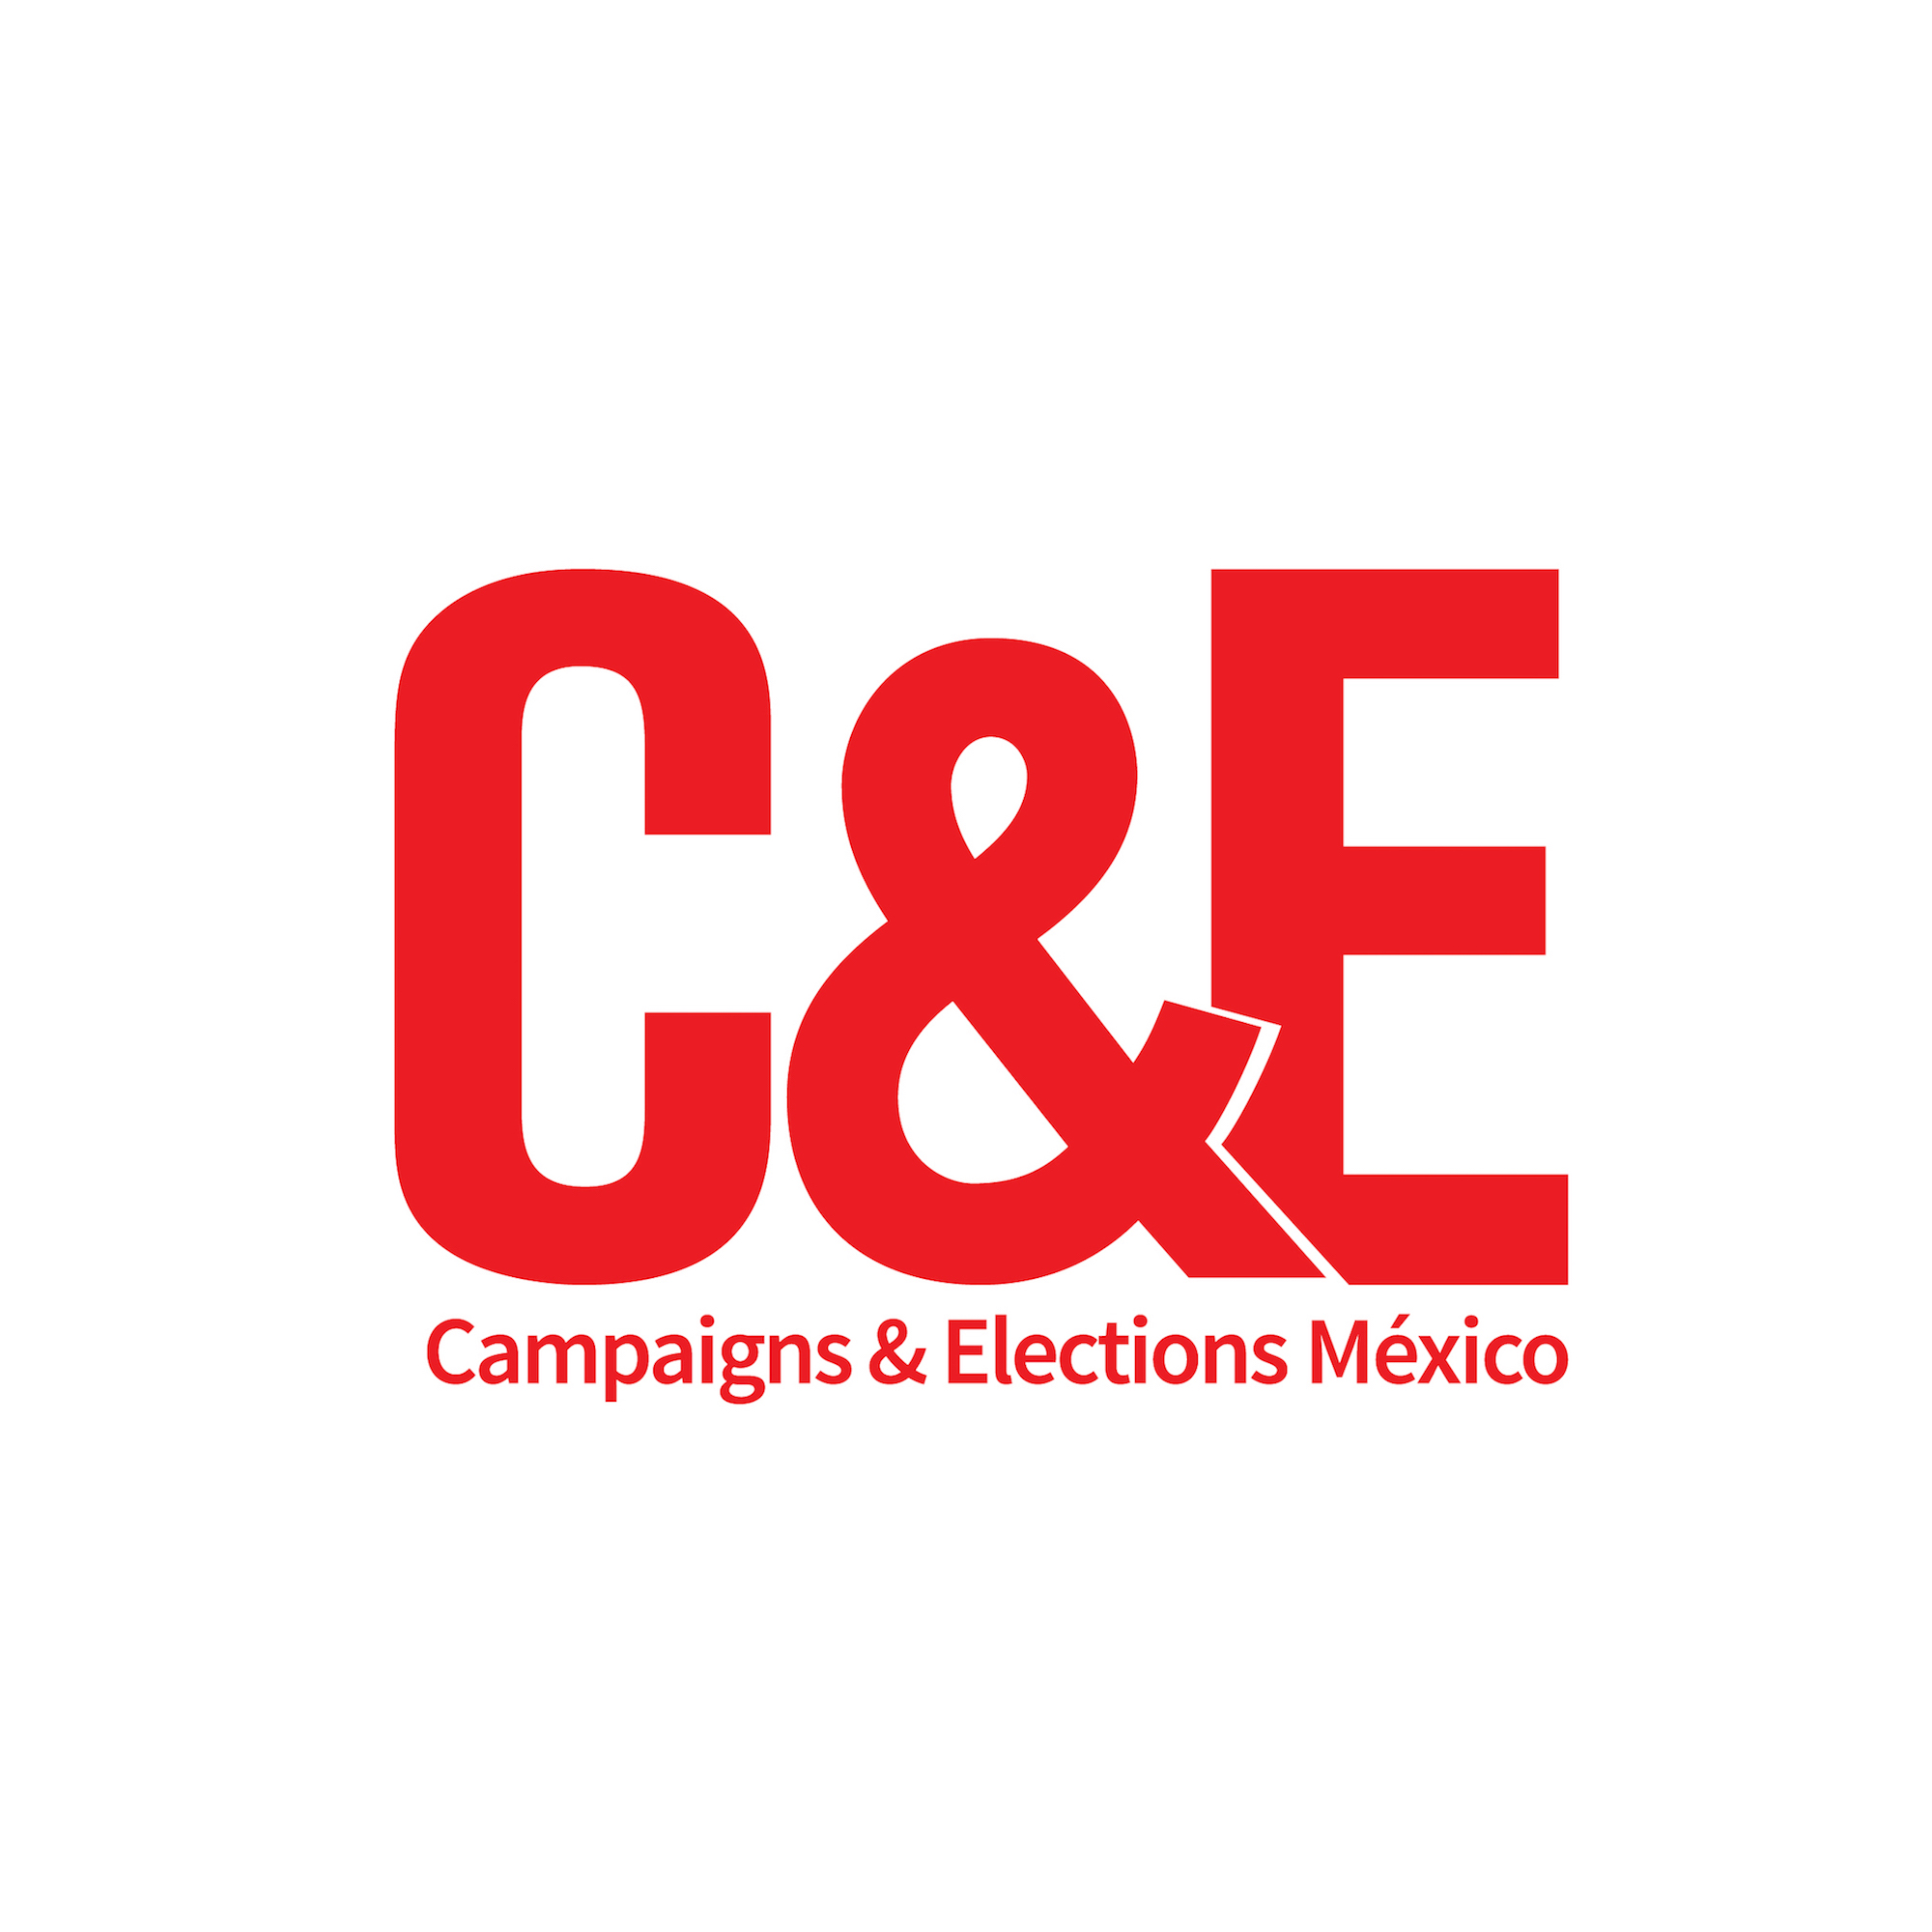 Campaign & Elections